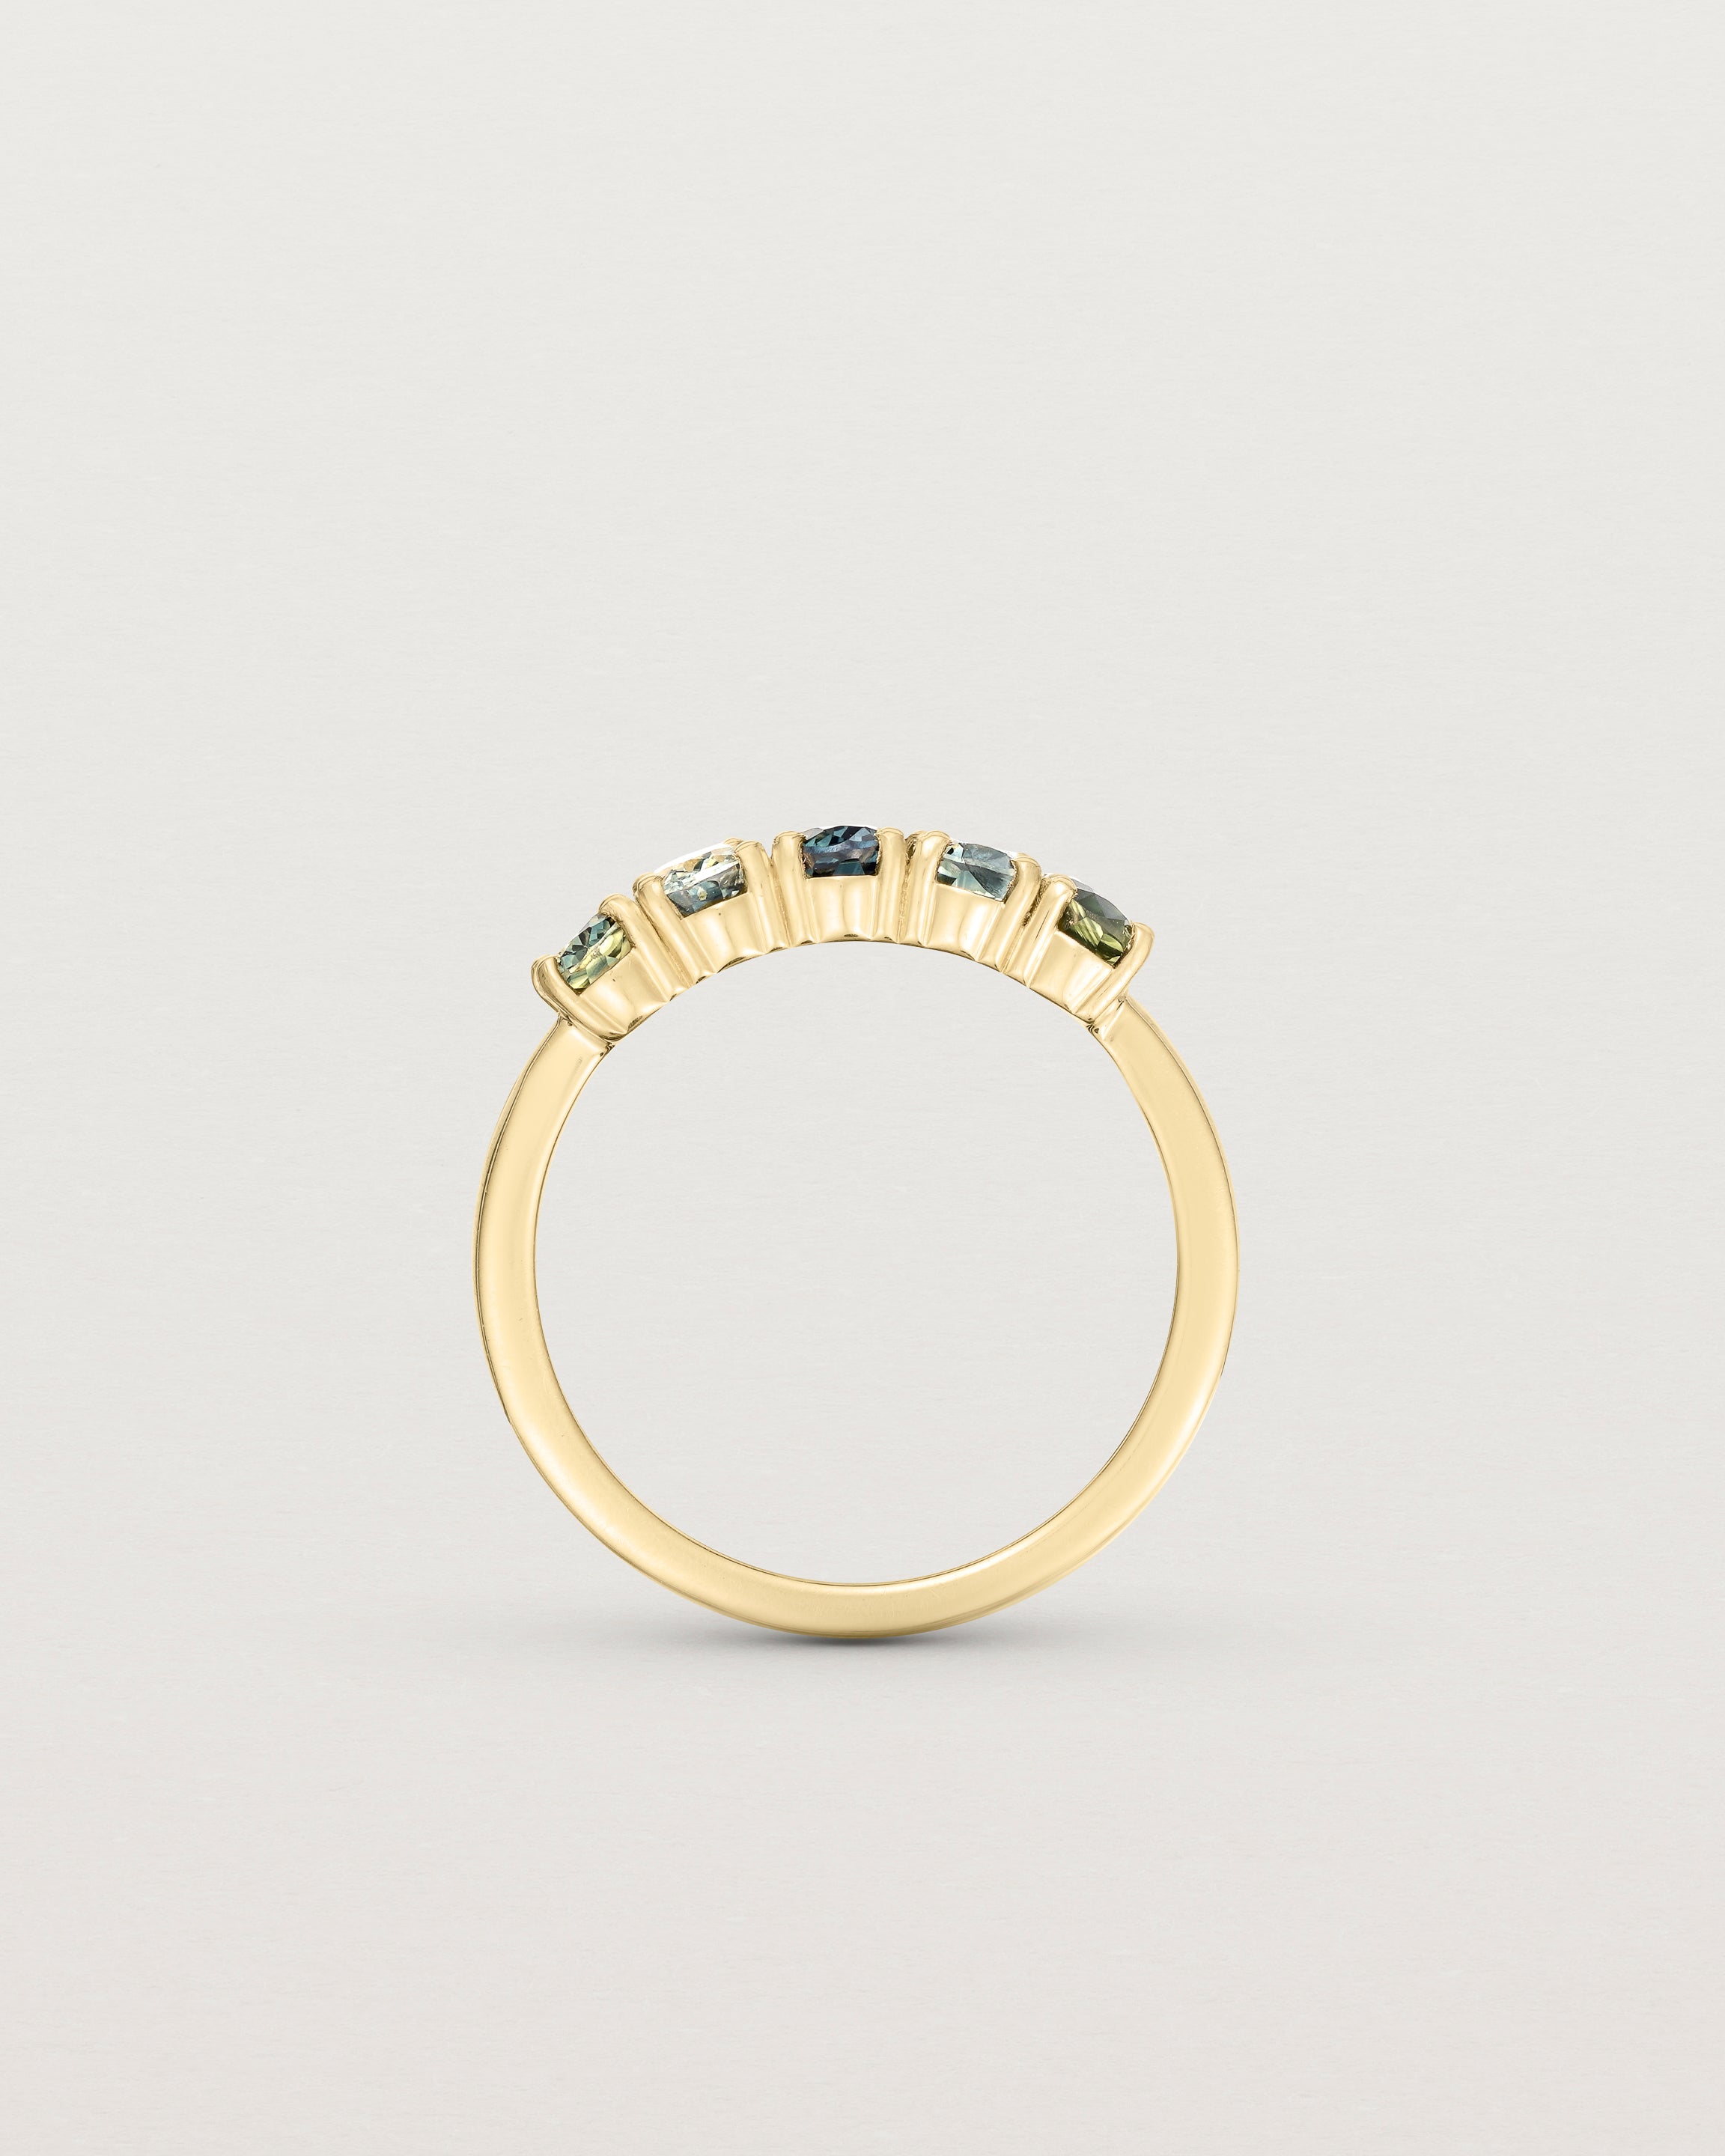 Standing view of the Manon Wrap Ring | Sapphires.